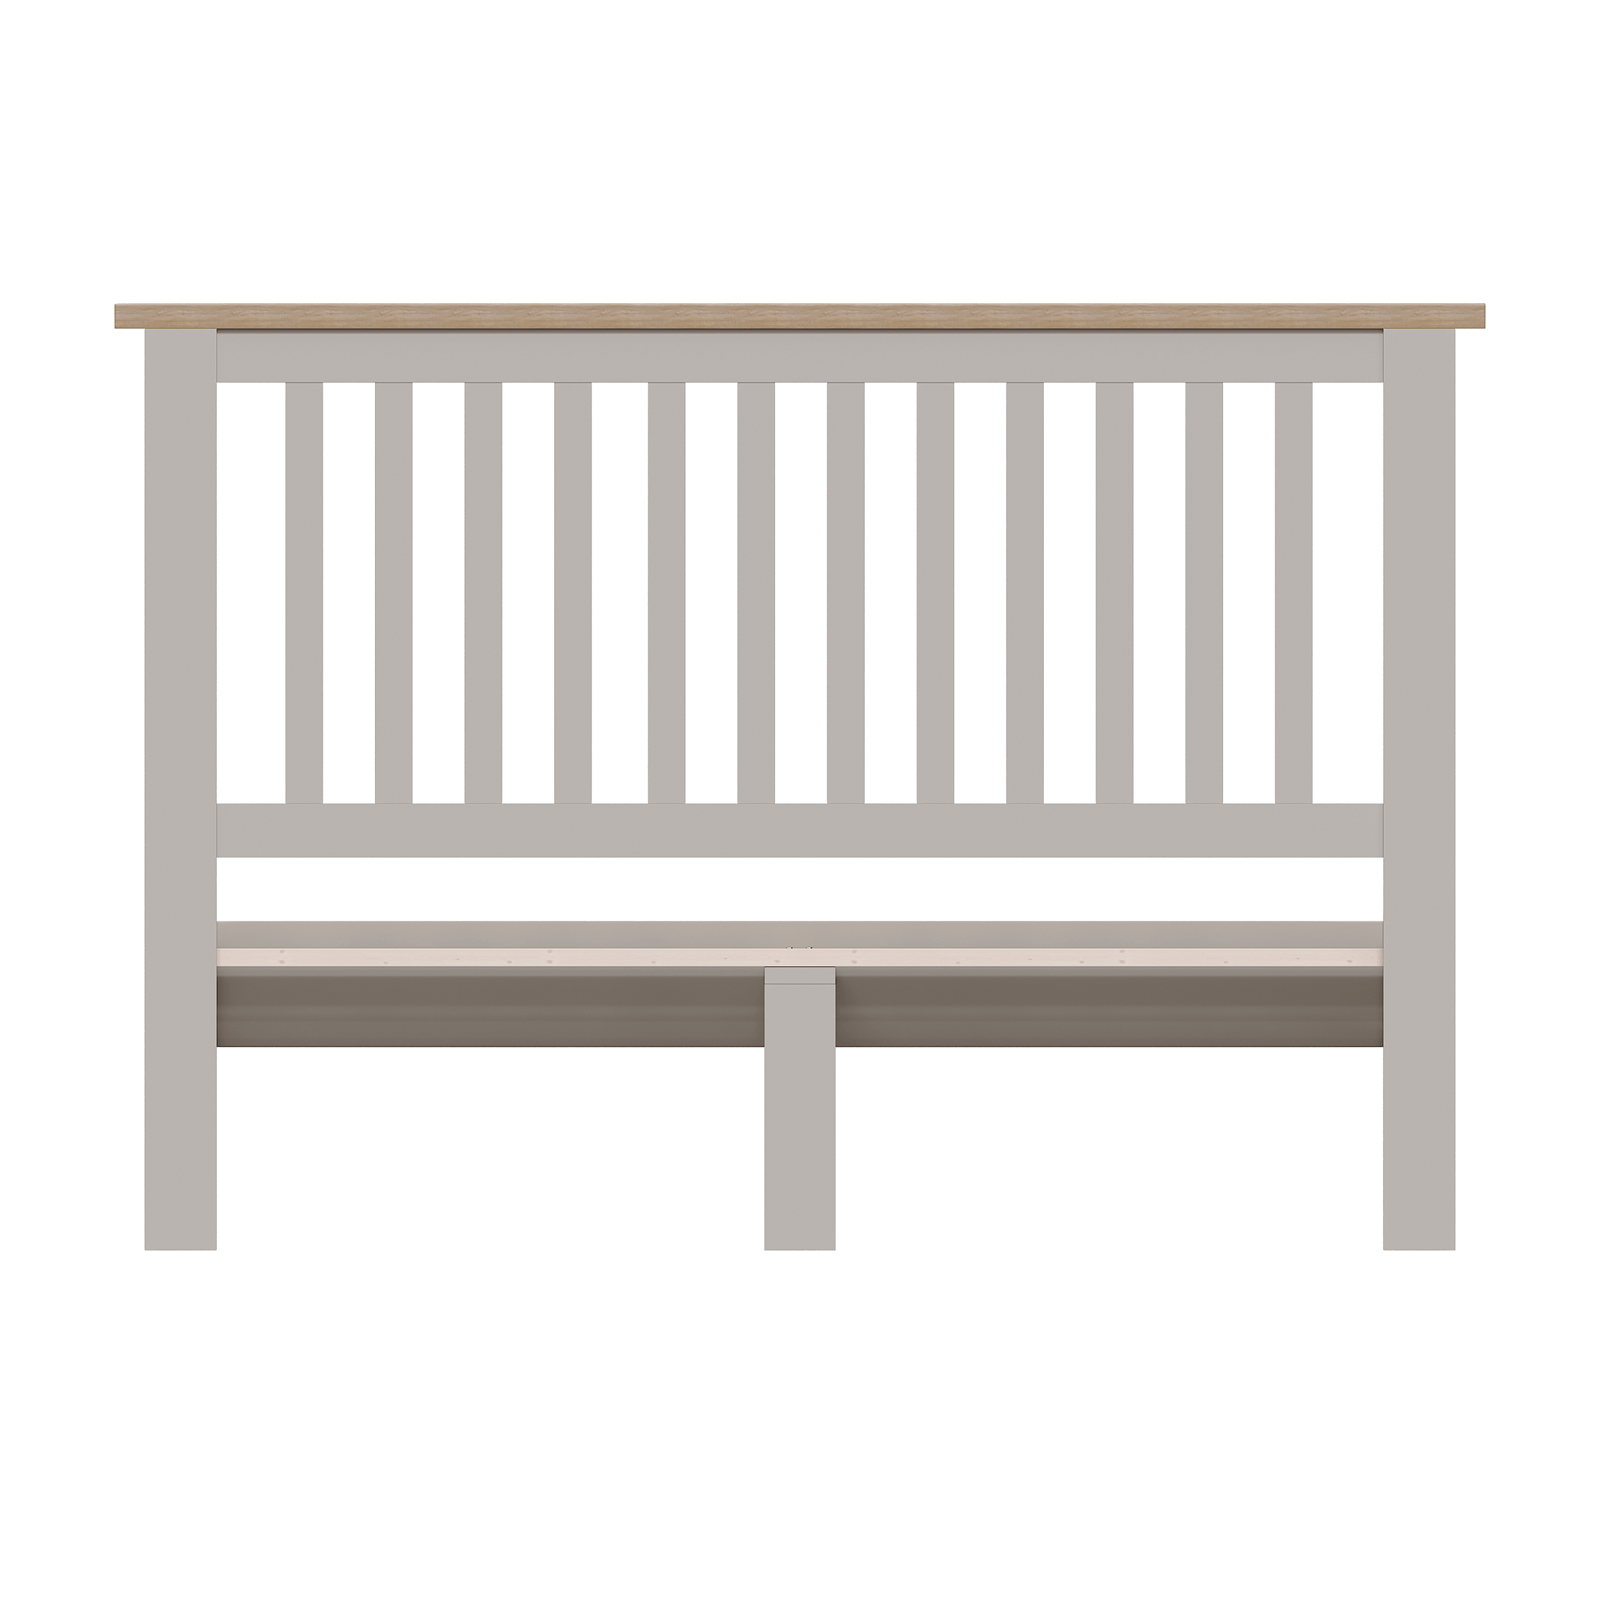 Padstow Kingsize Bed Frame - Truffle